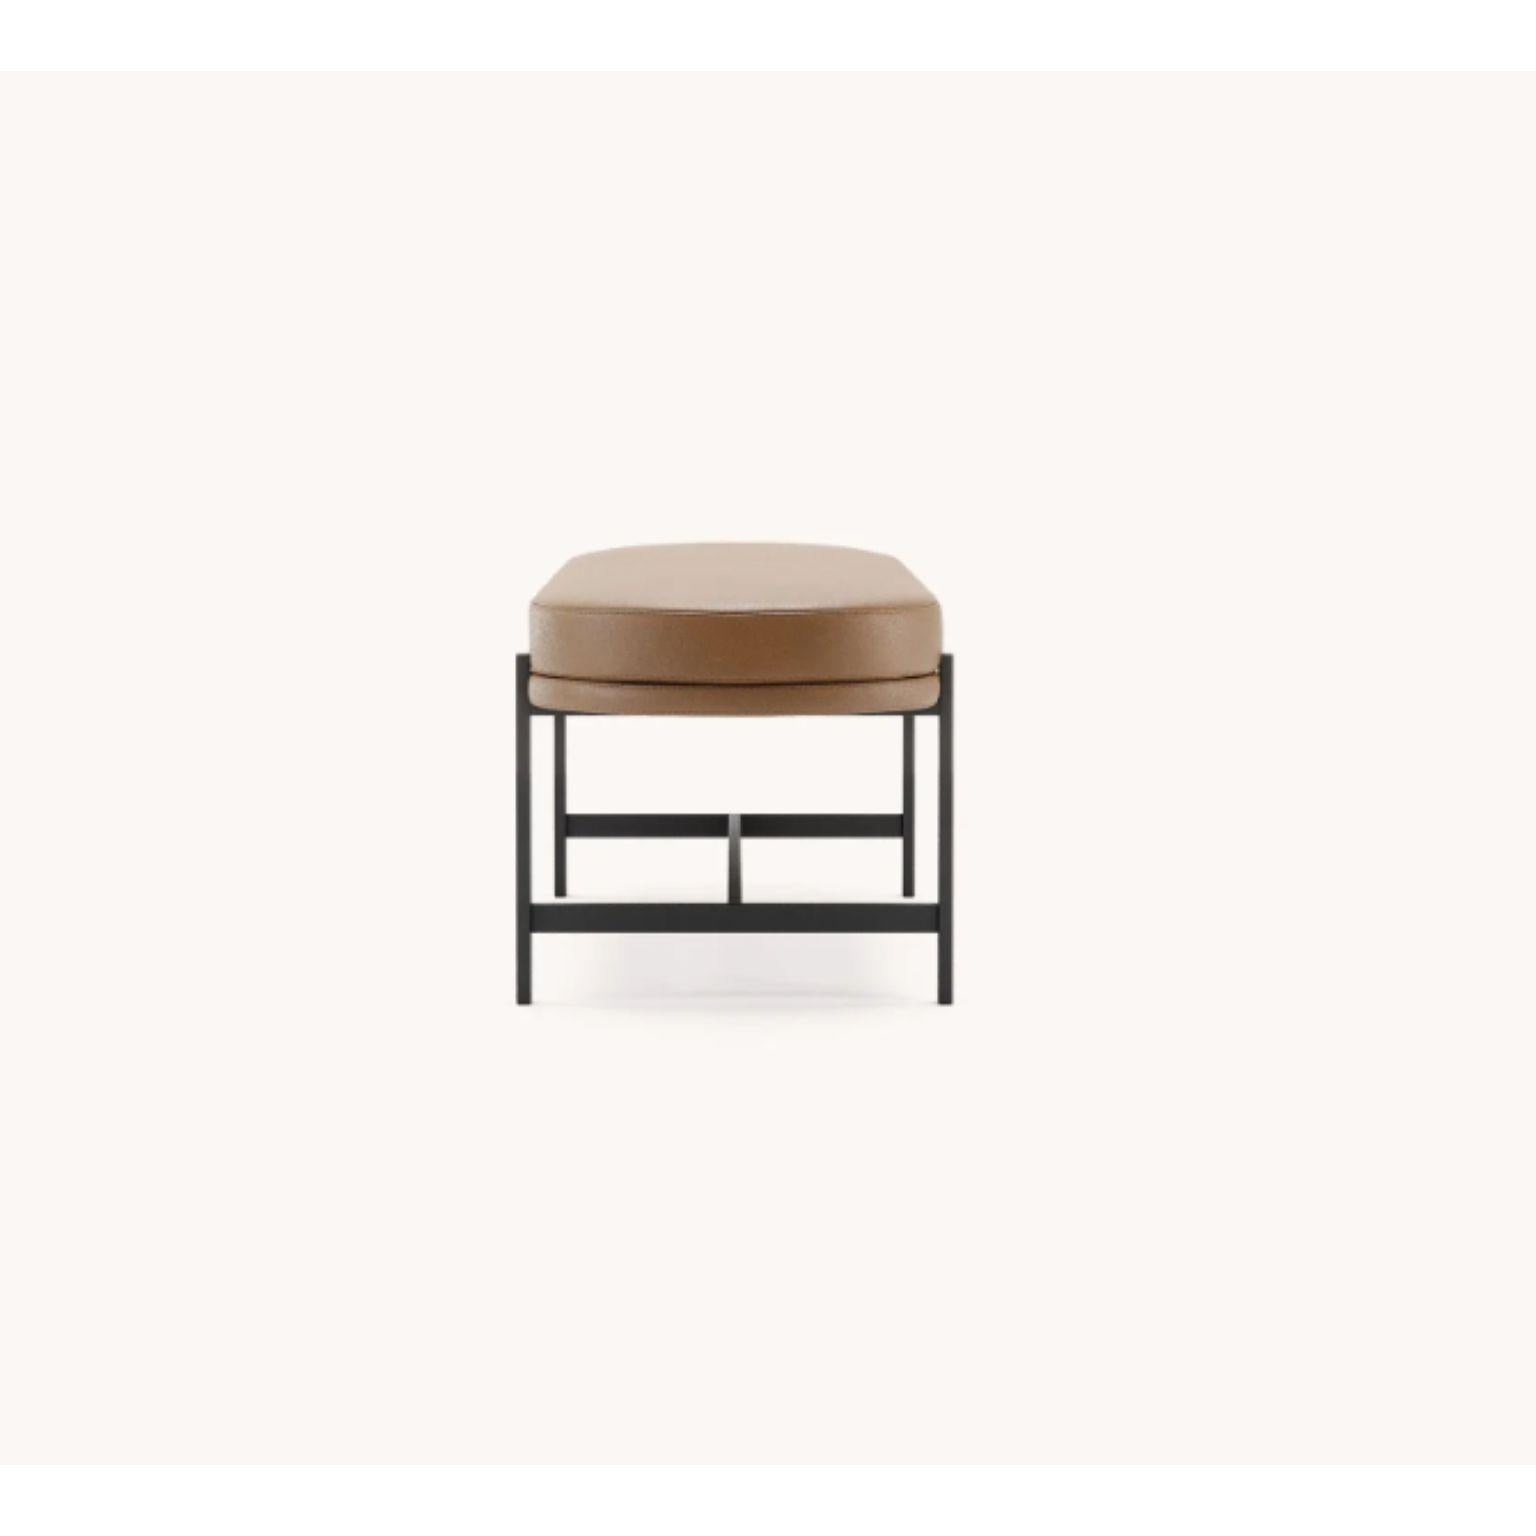 Portuguese Colbert L Stool by Domkapa For Sale